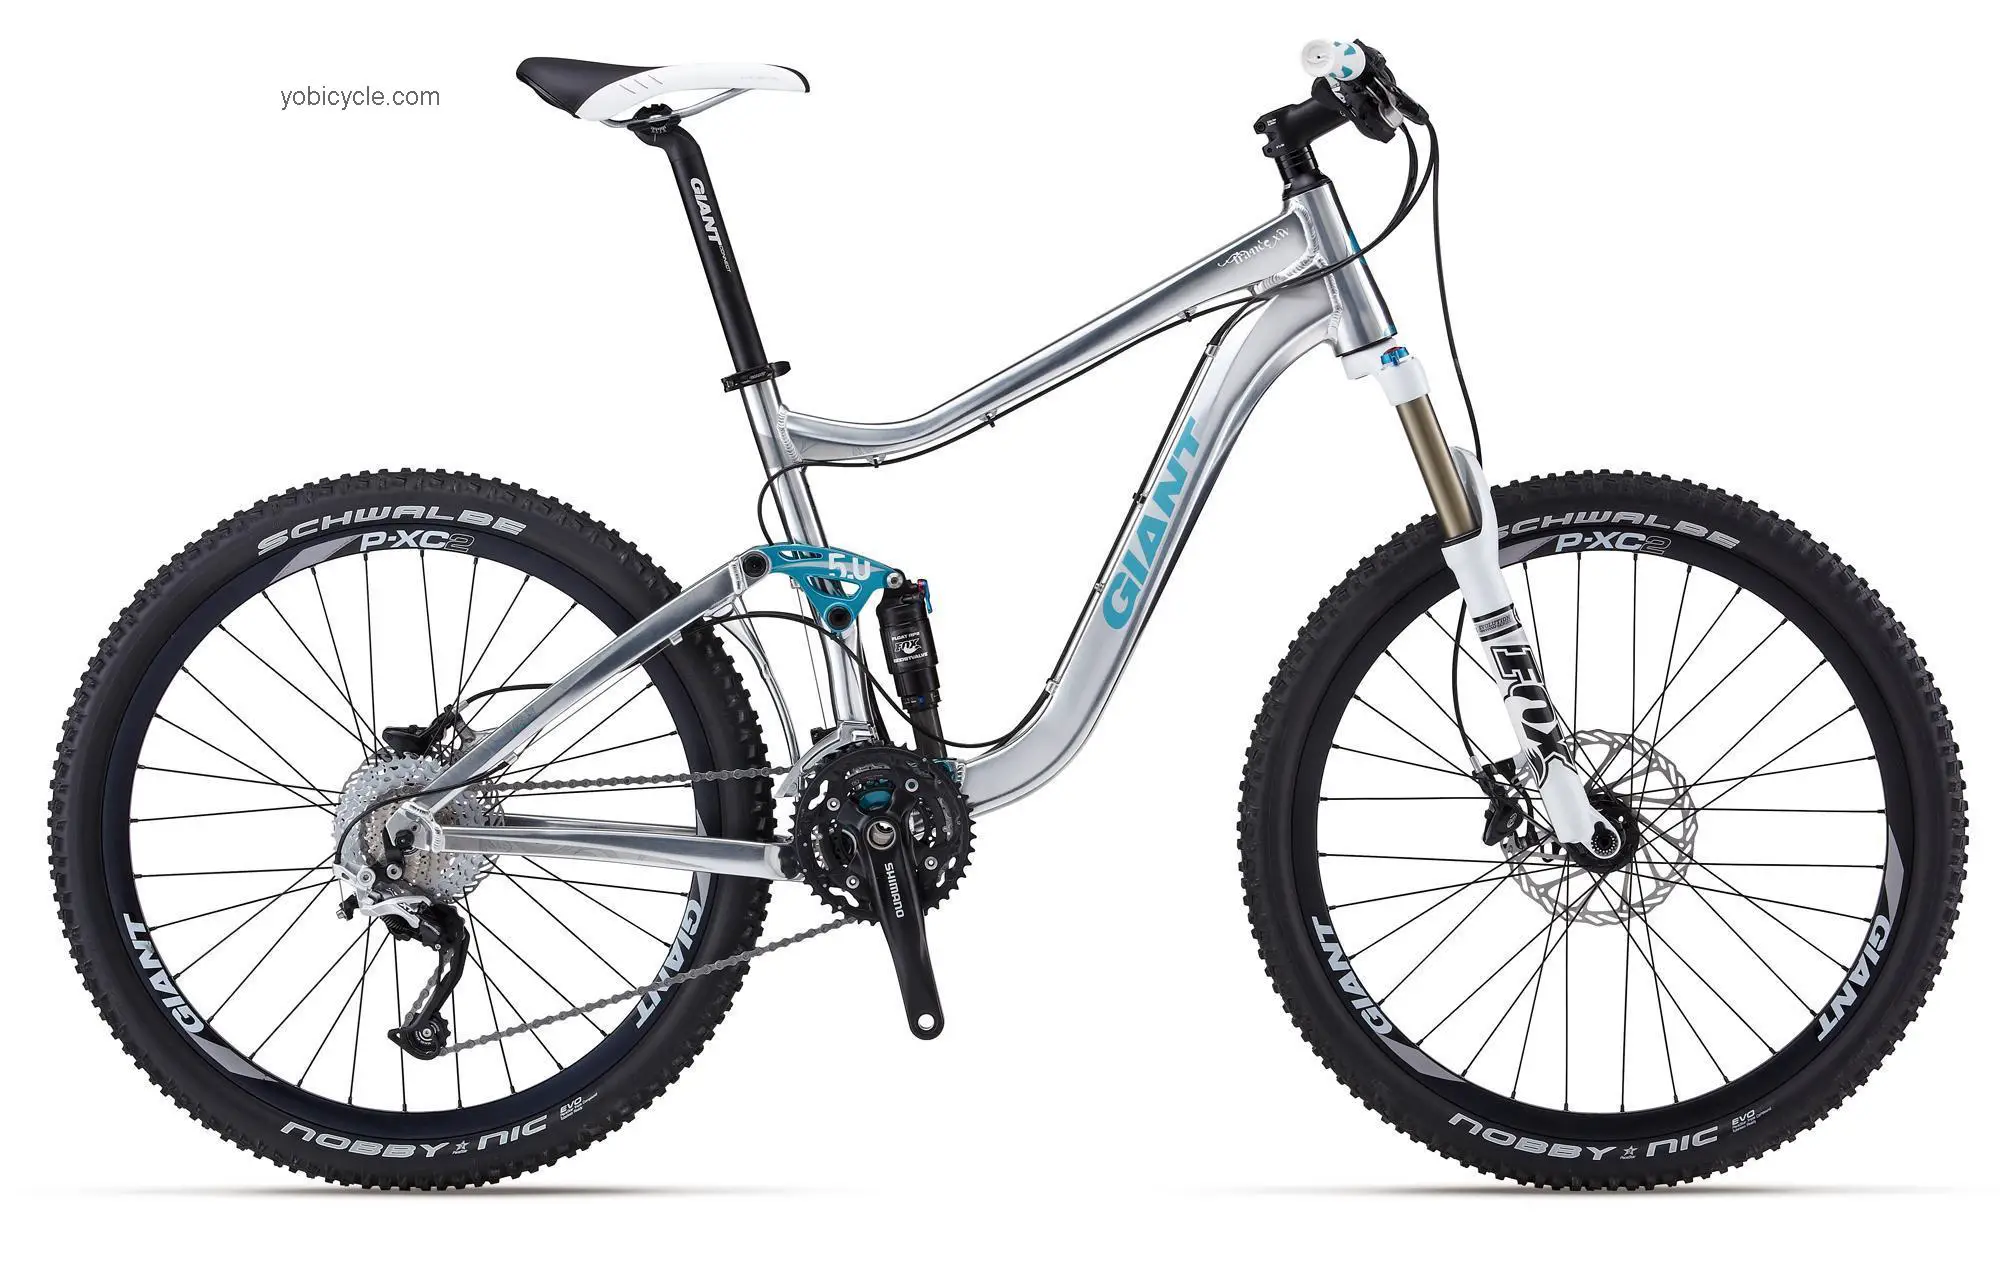 Giant Trance X1 W 2012 comparison online with competitors